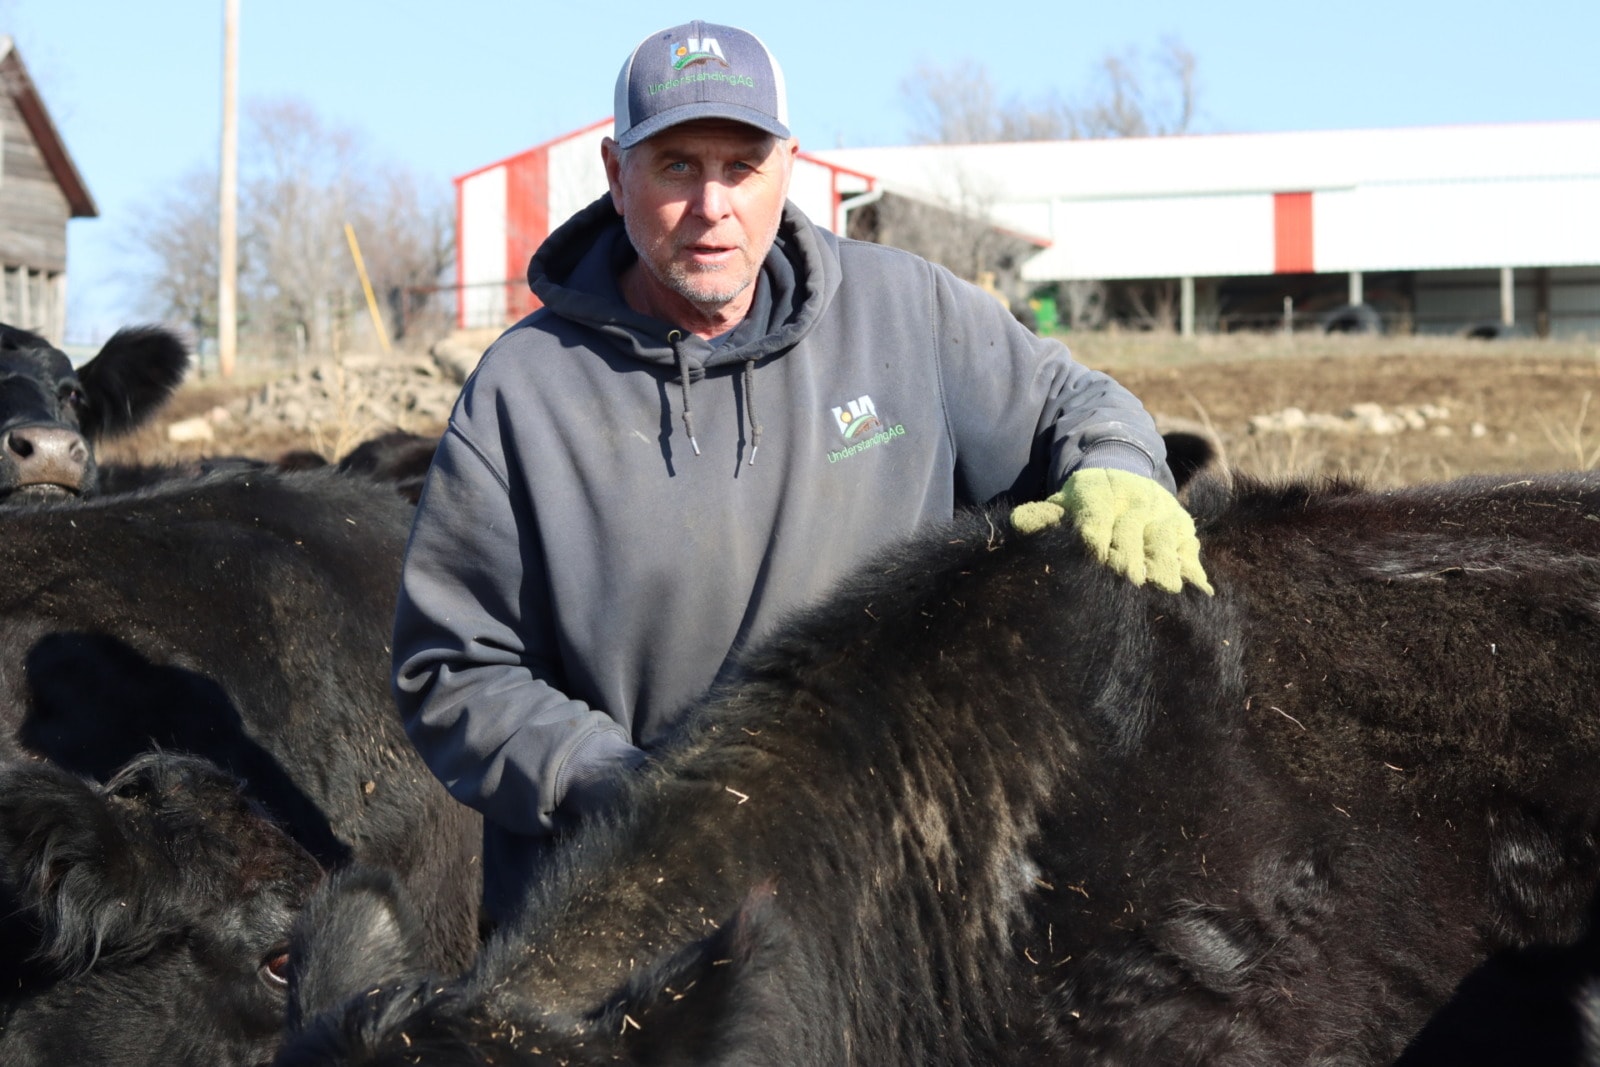 A man in a gray hoodie and green gloves stands alongside several grass-fed black cows as he rubs their backs.